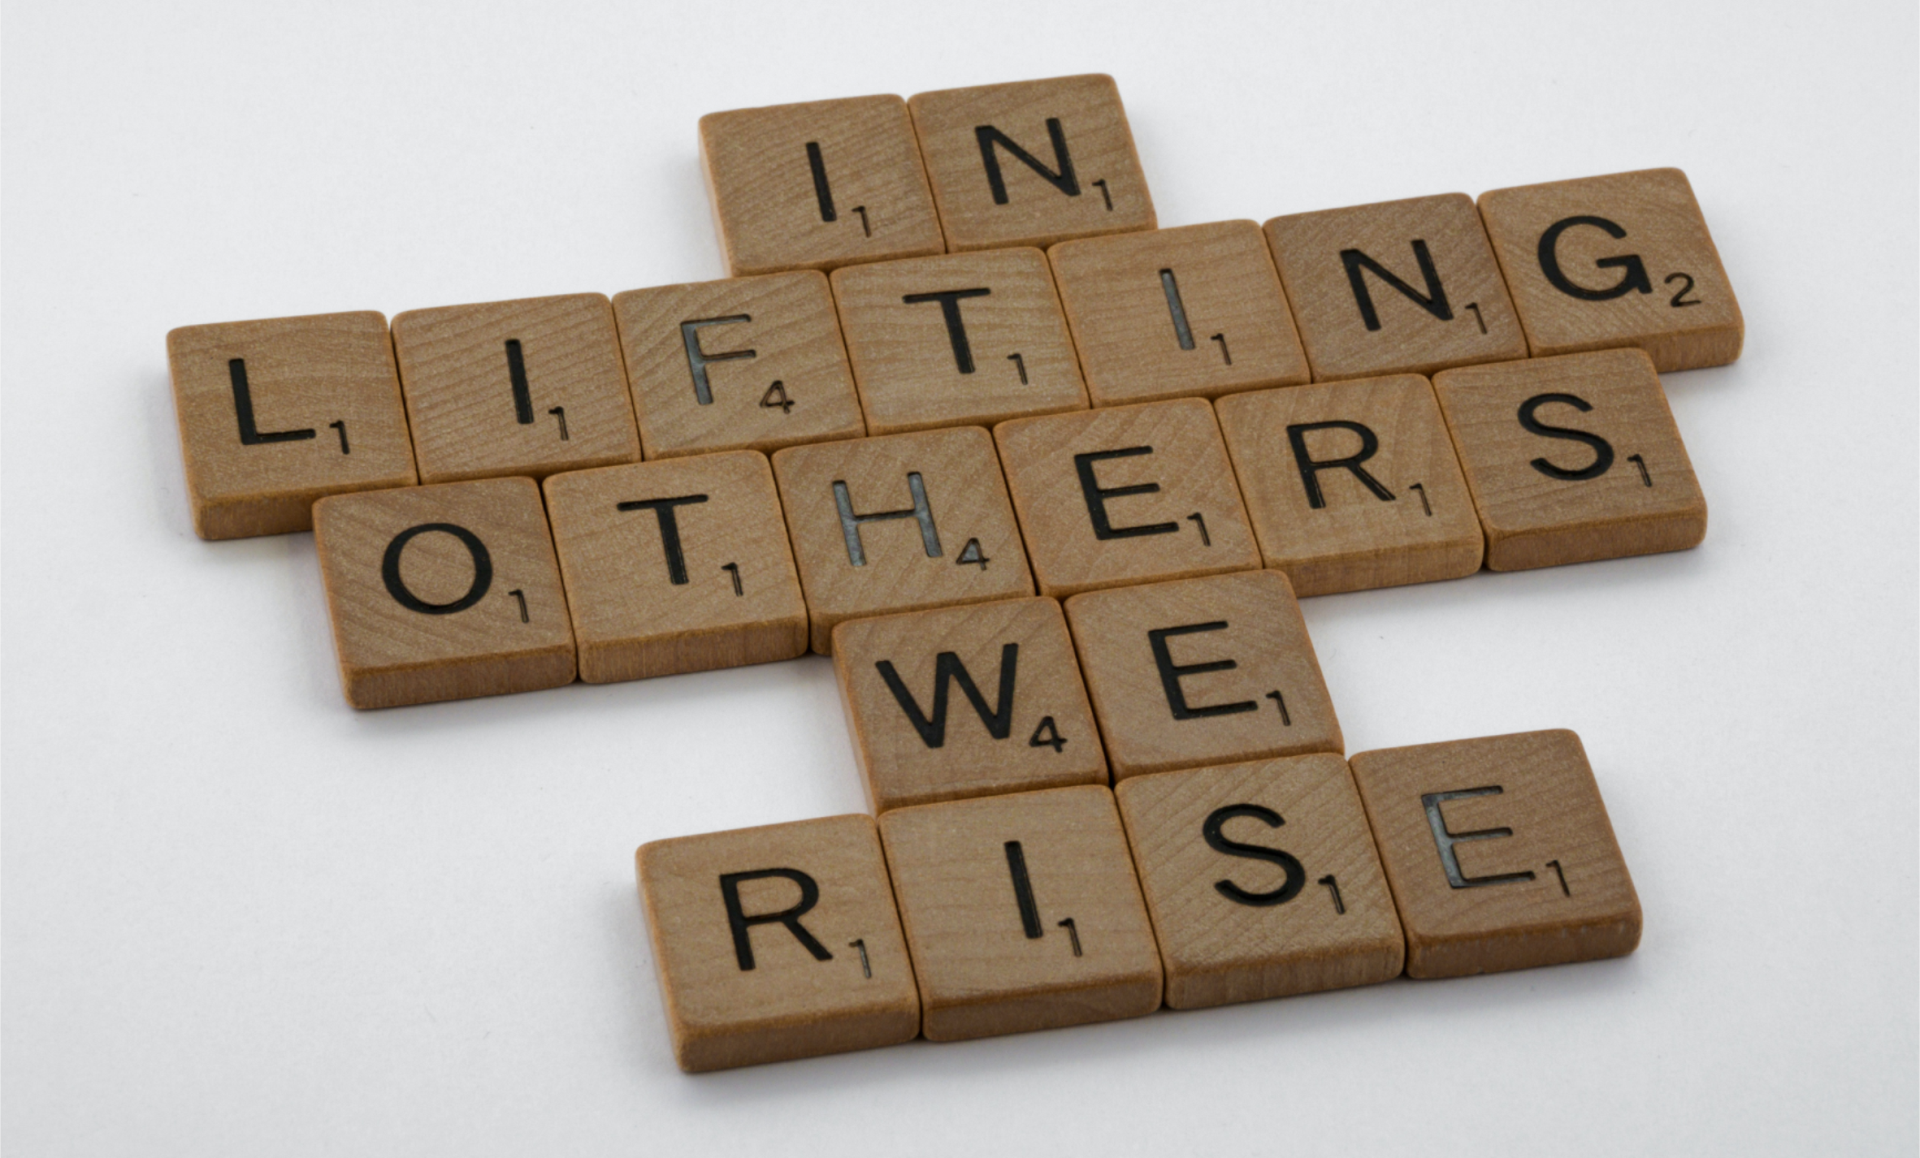 Scrabble Tiles: In Lifting Others We Rise